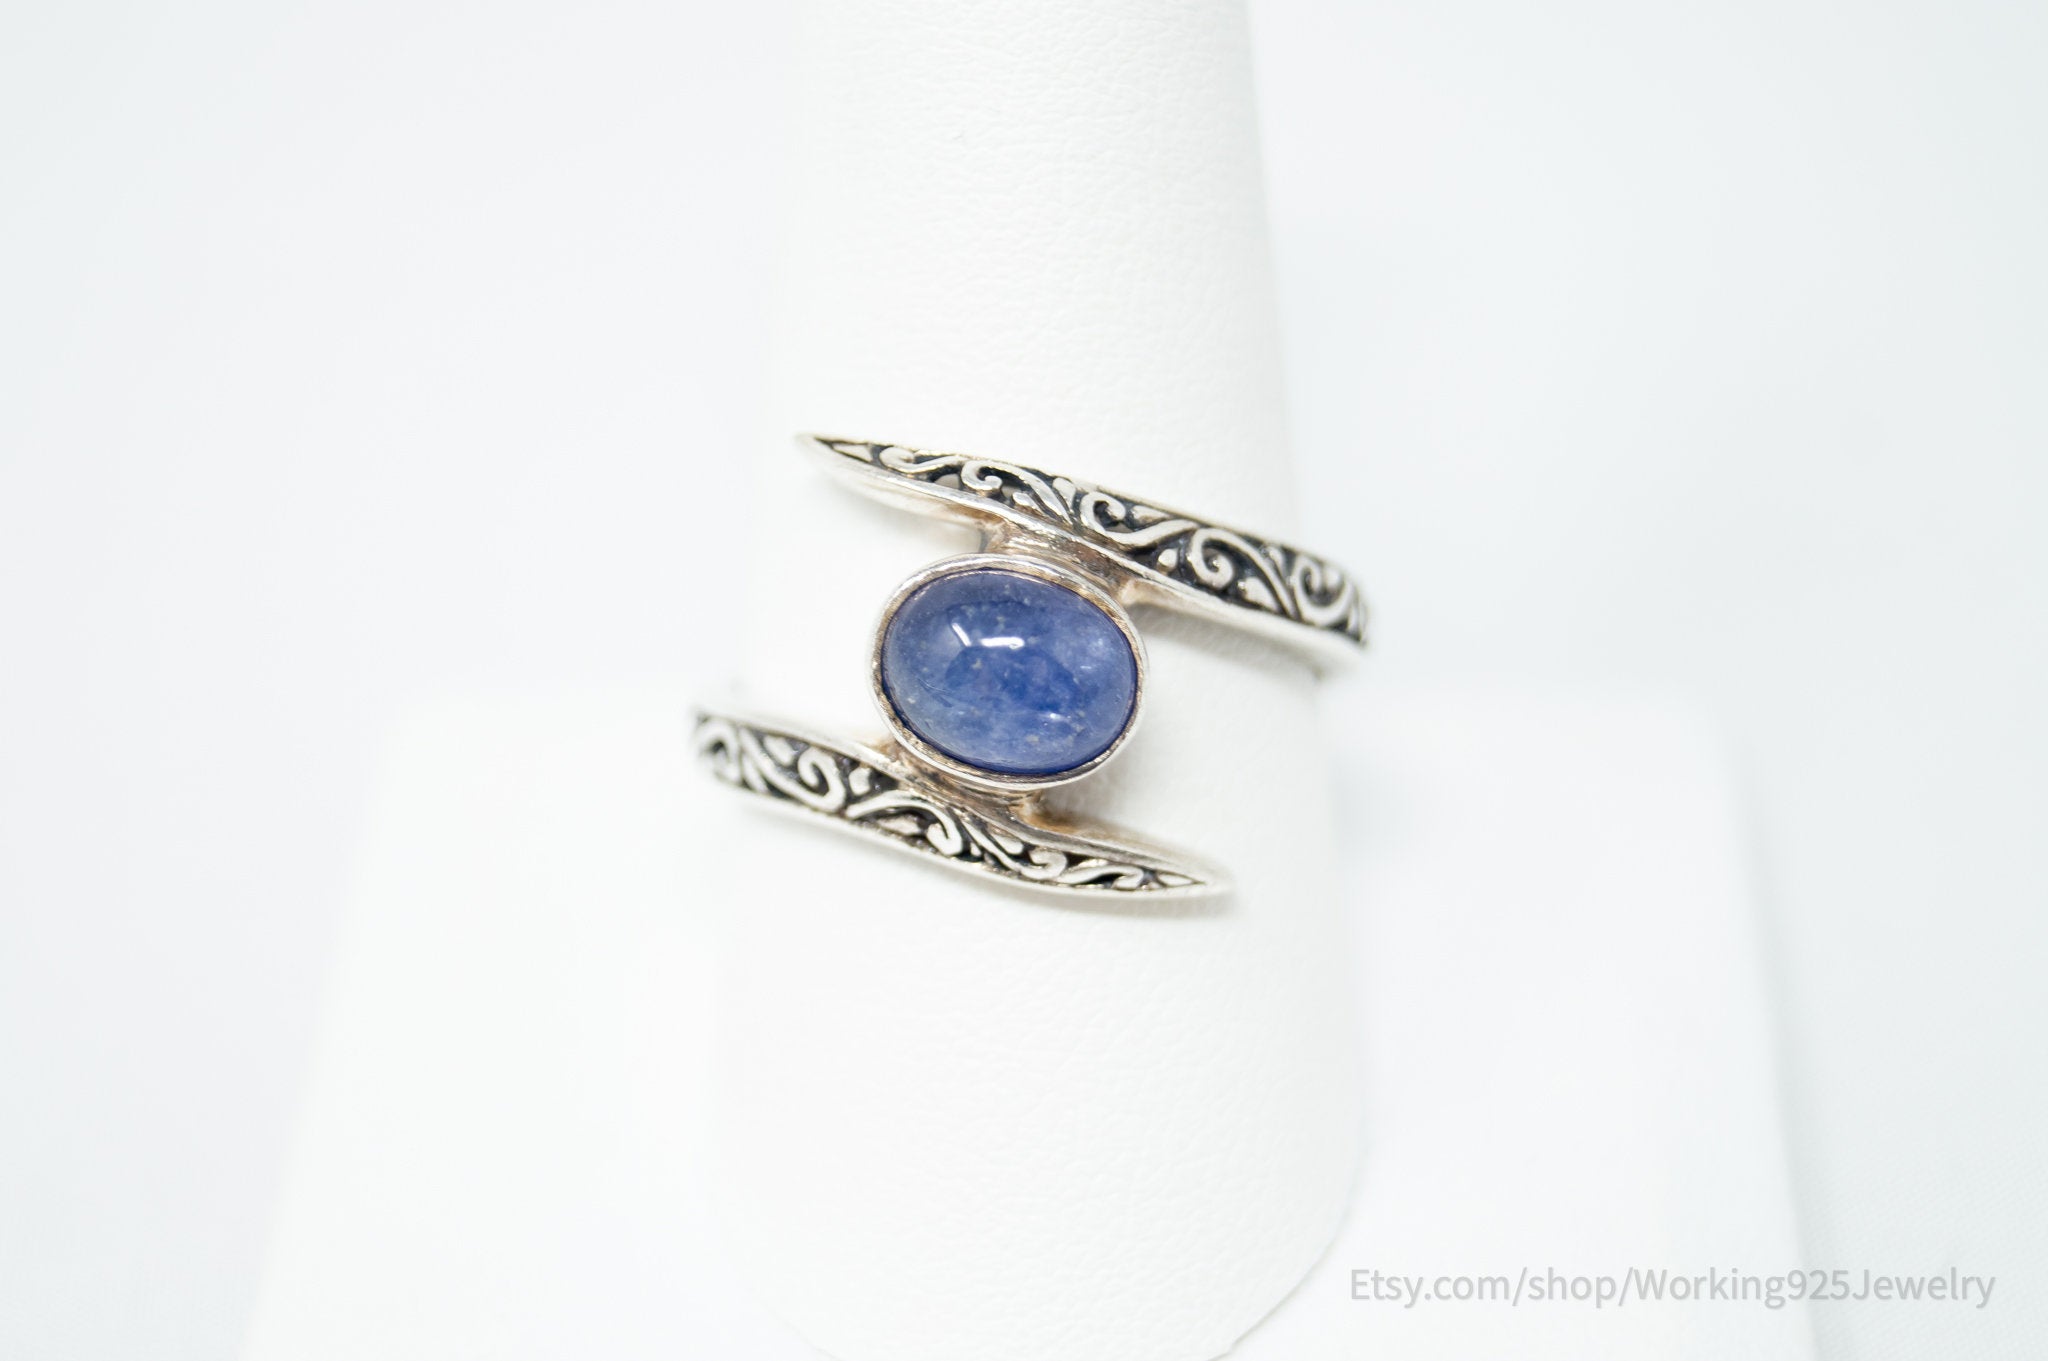 Vintage Deco Style Blue Gemstone Swirl Scroll Sterling Silver Ring - Size 10